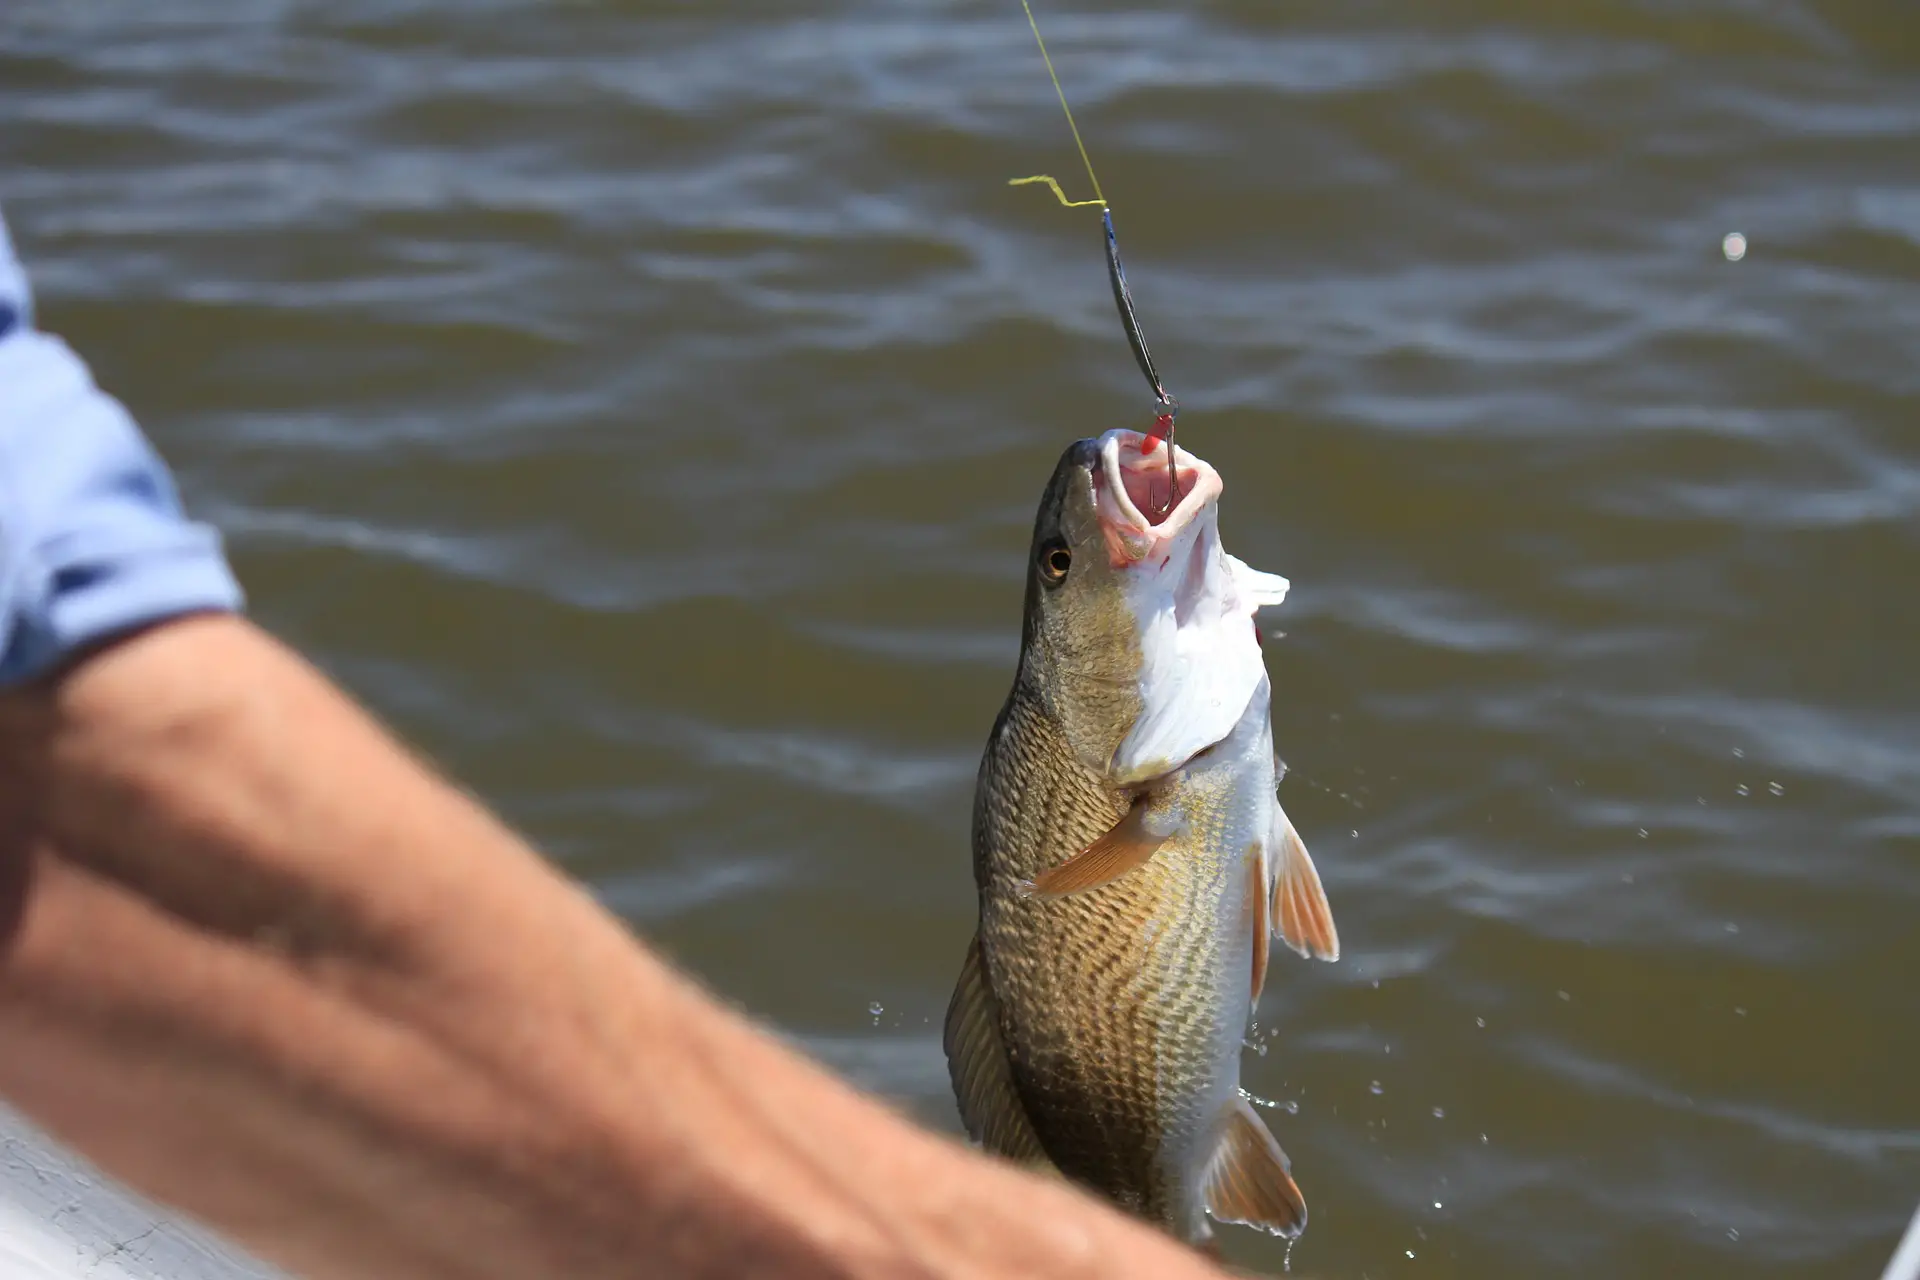 A redfish on the hook caught by a fisherman